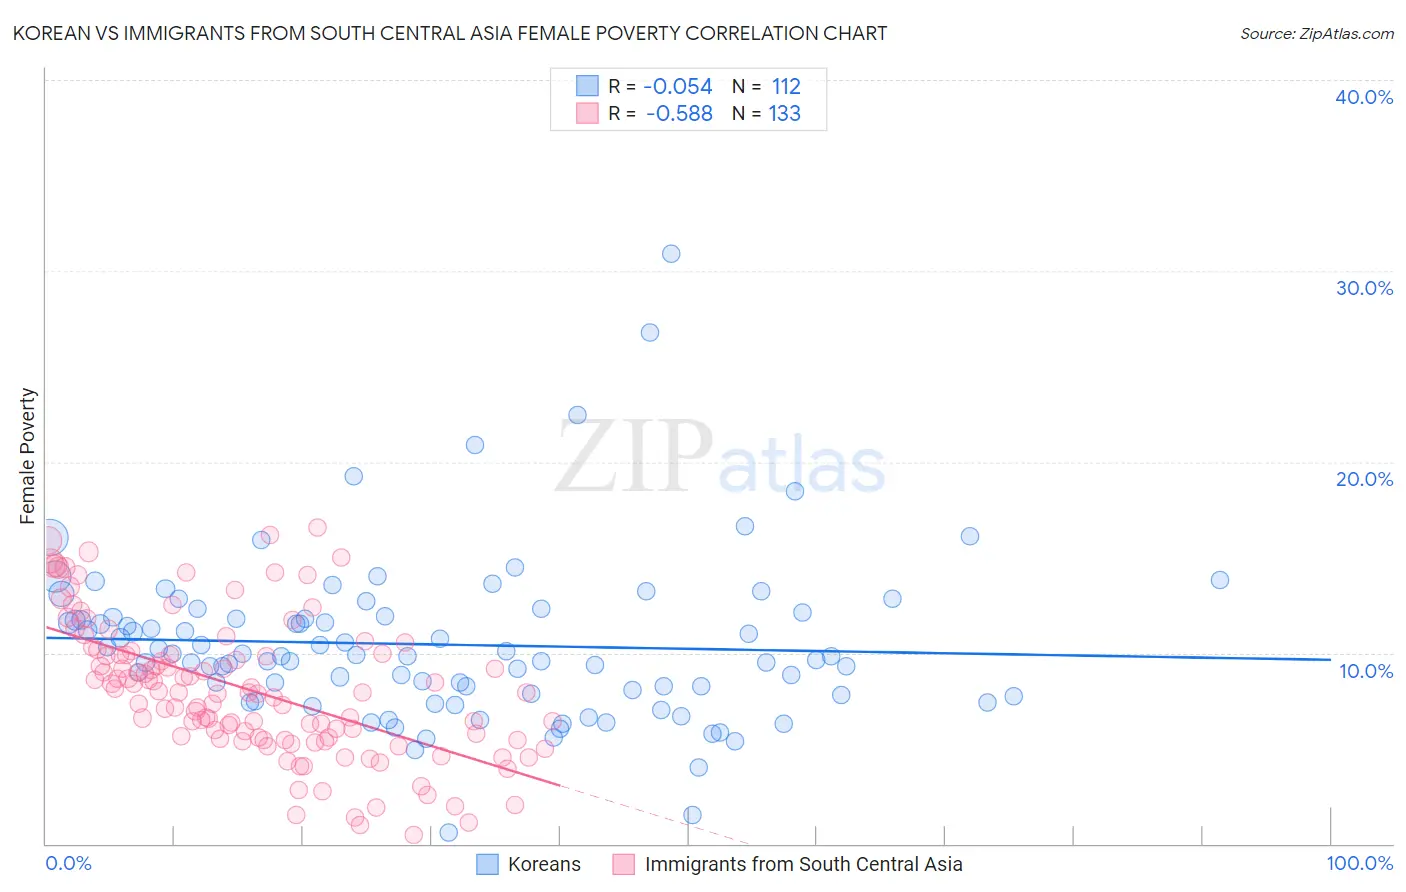 Korean vs Immigrants from South Central Asia Female Poverty